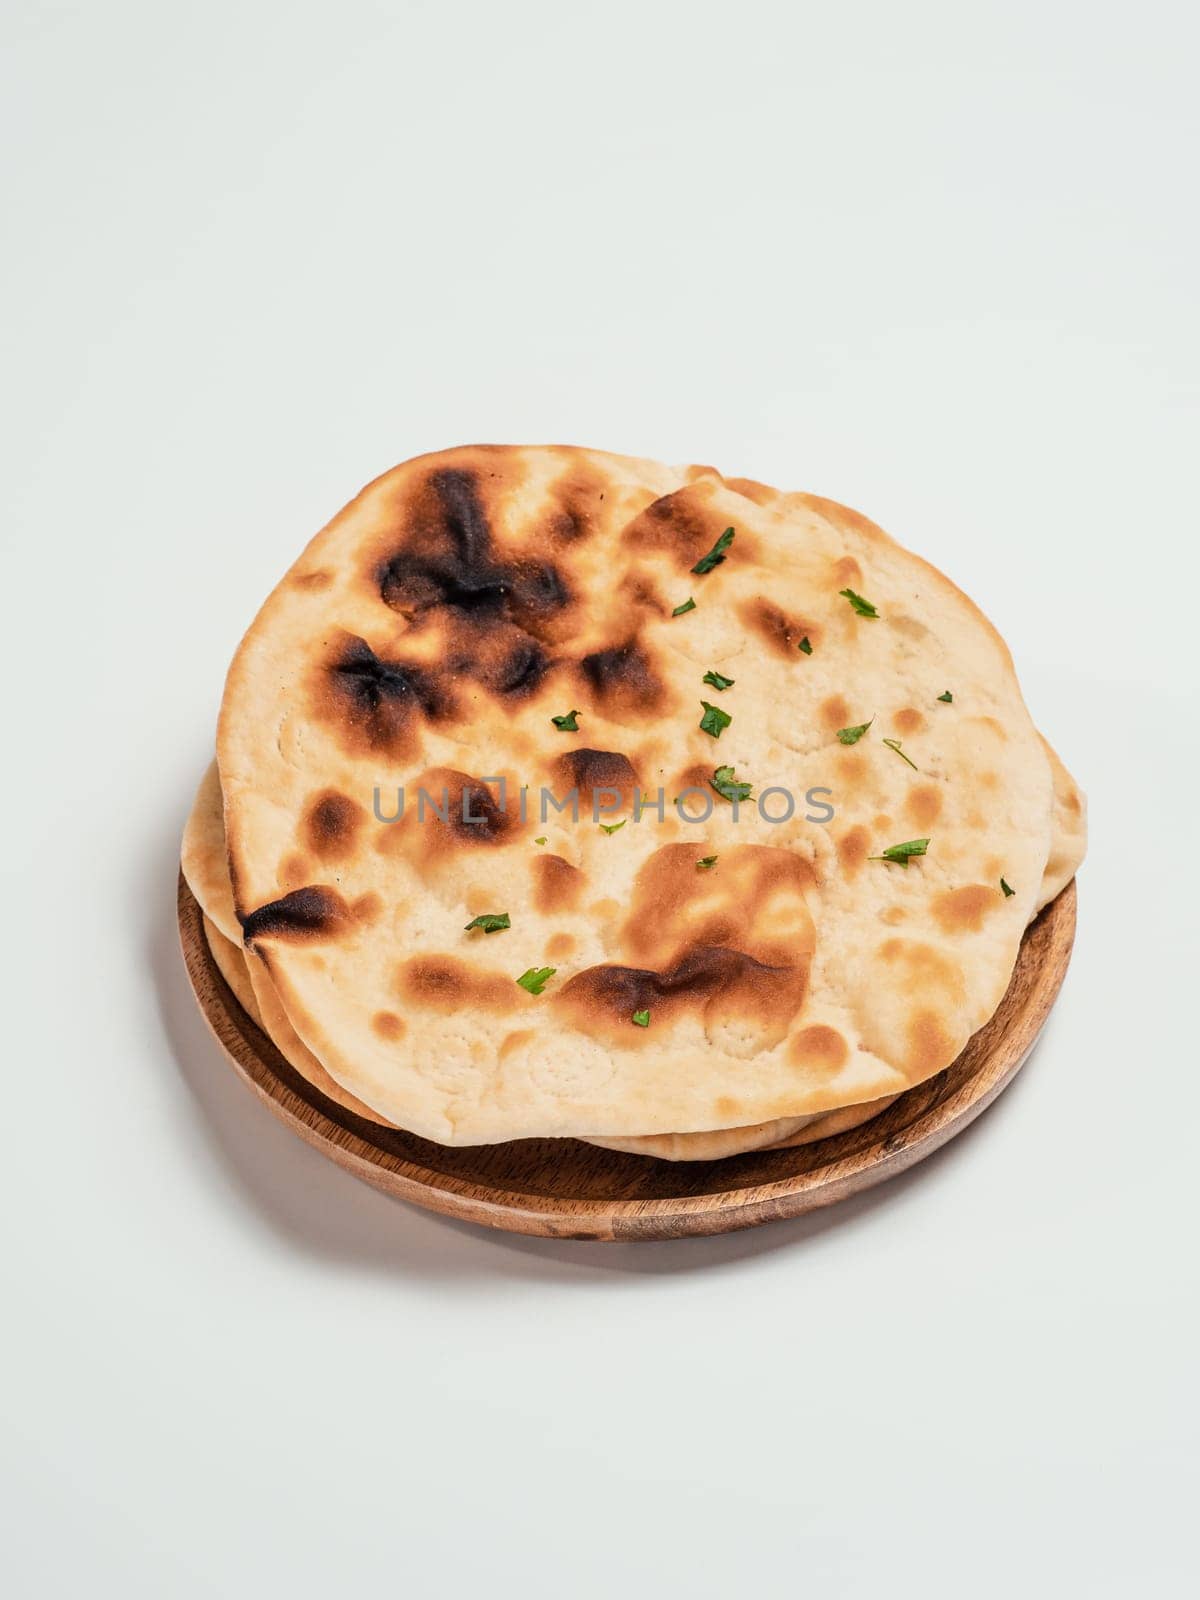 Fresh naan bread on plate isolated on white background. Stack of several perfect naan flatbreads on white.